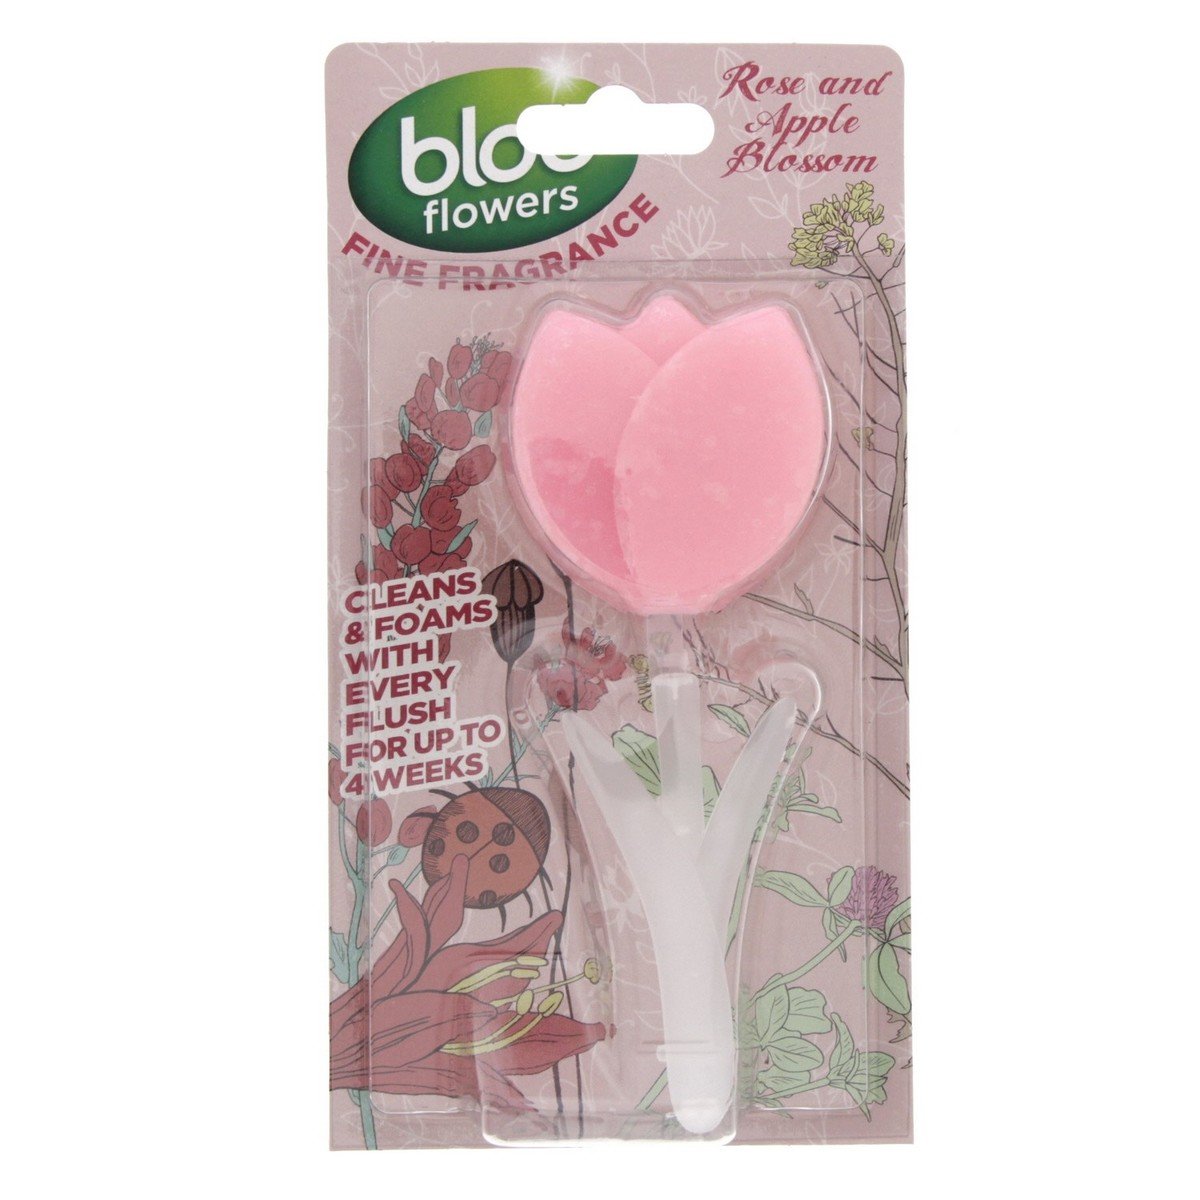 Bloo Flowers Rose And Apple Blossom Toilet Blocks 34g